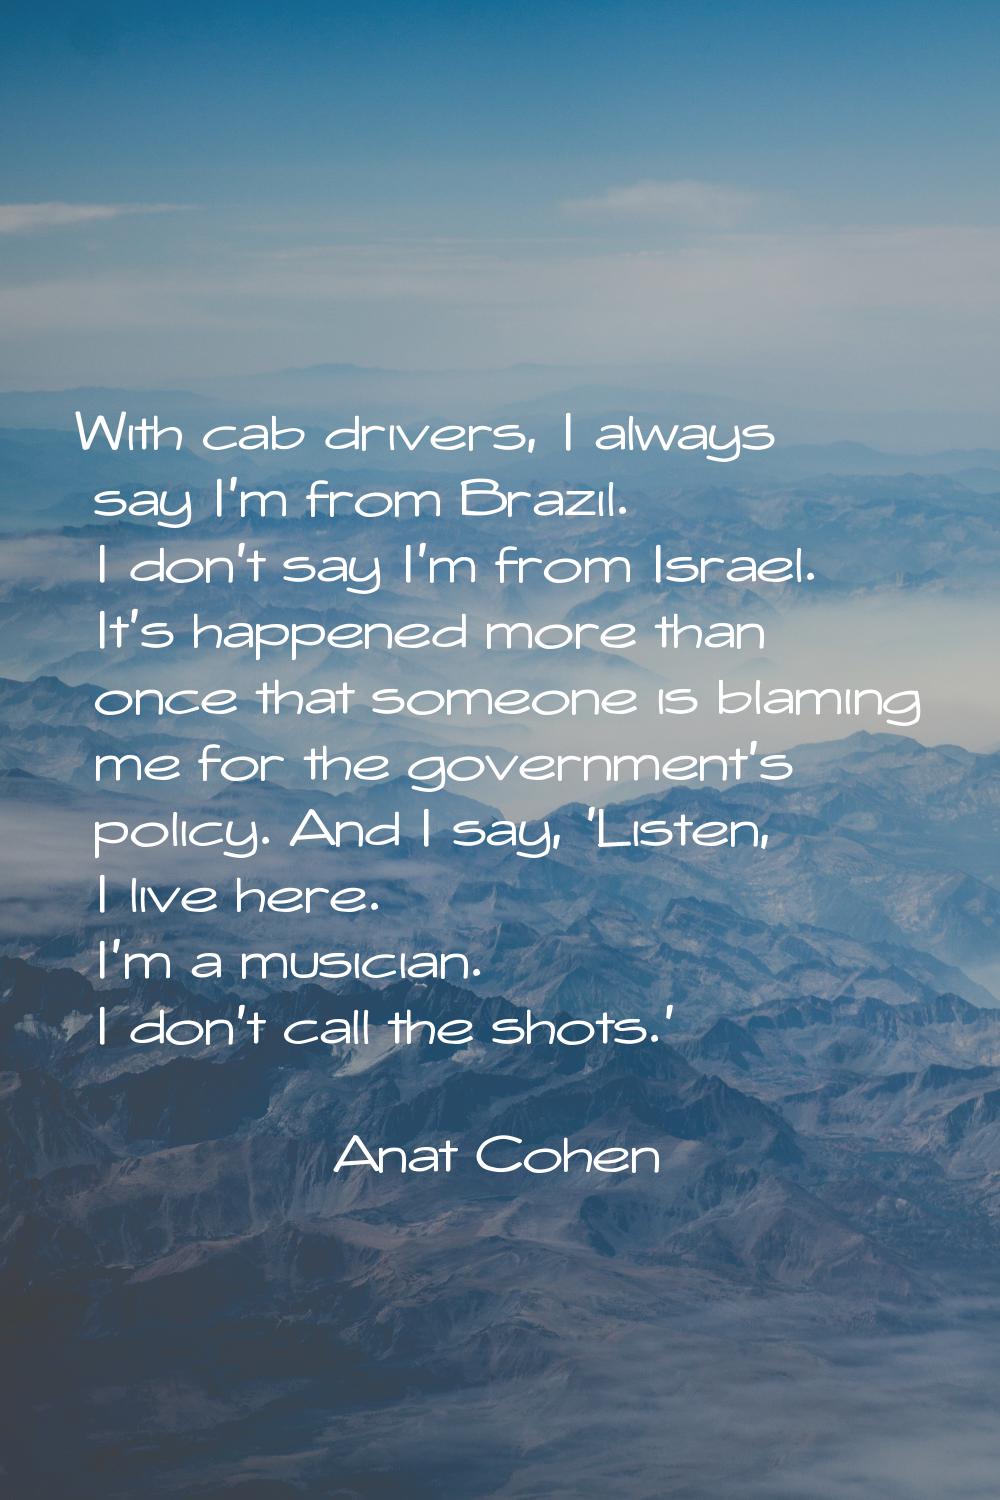 With cab drivers, I always say I'm from Brazil. I don't say I'm from Israel. It's happened more tha